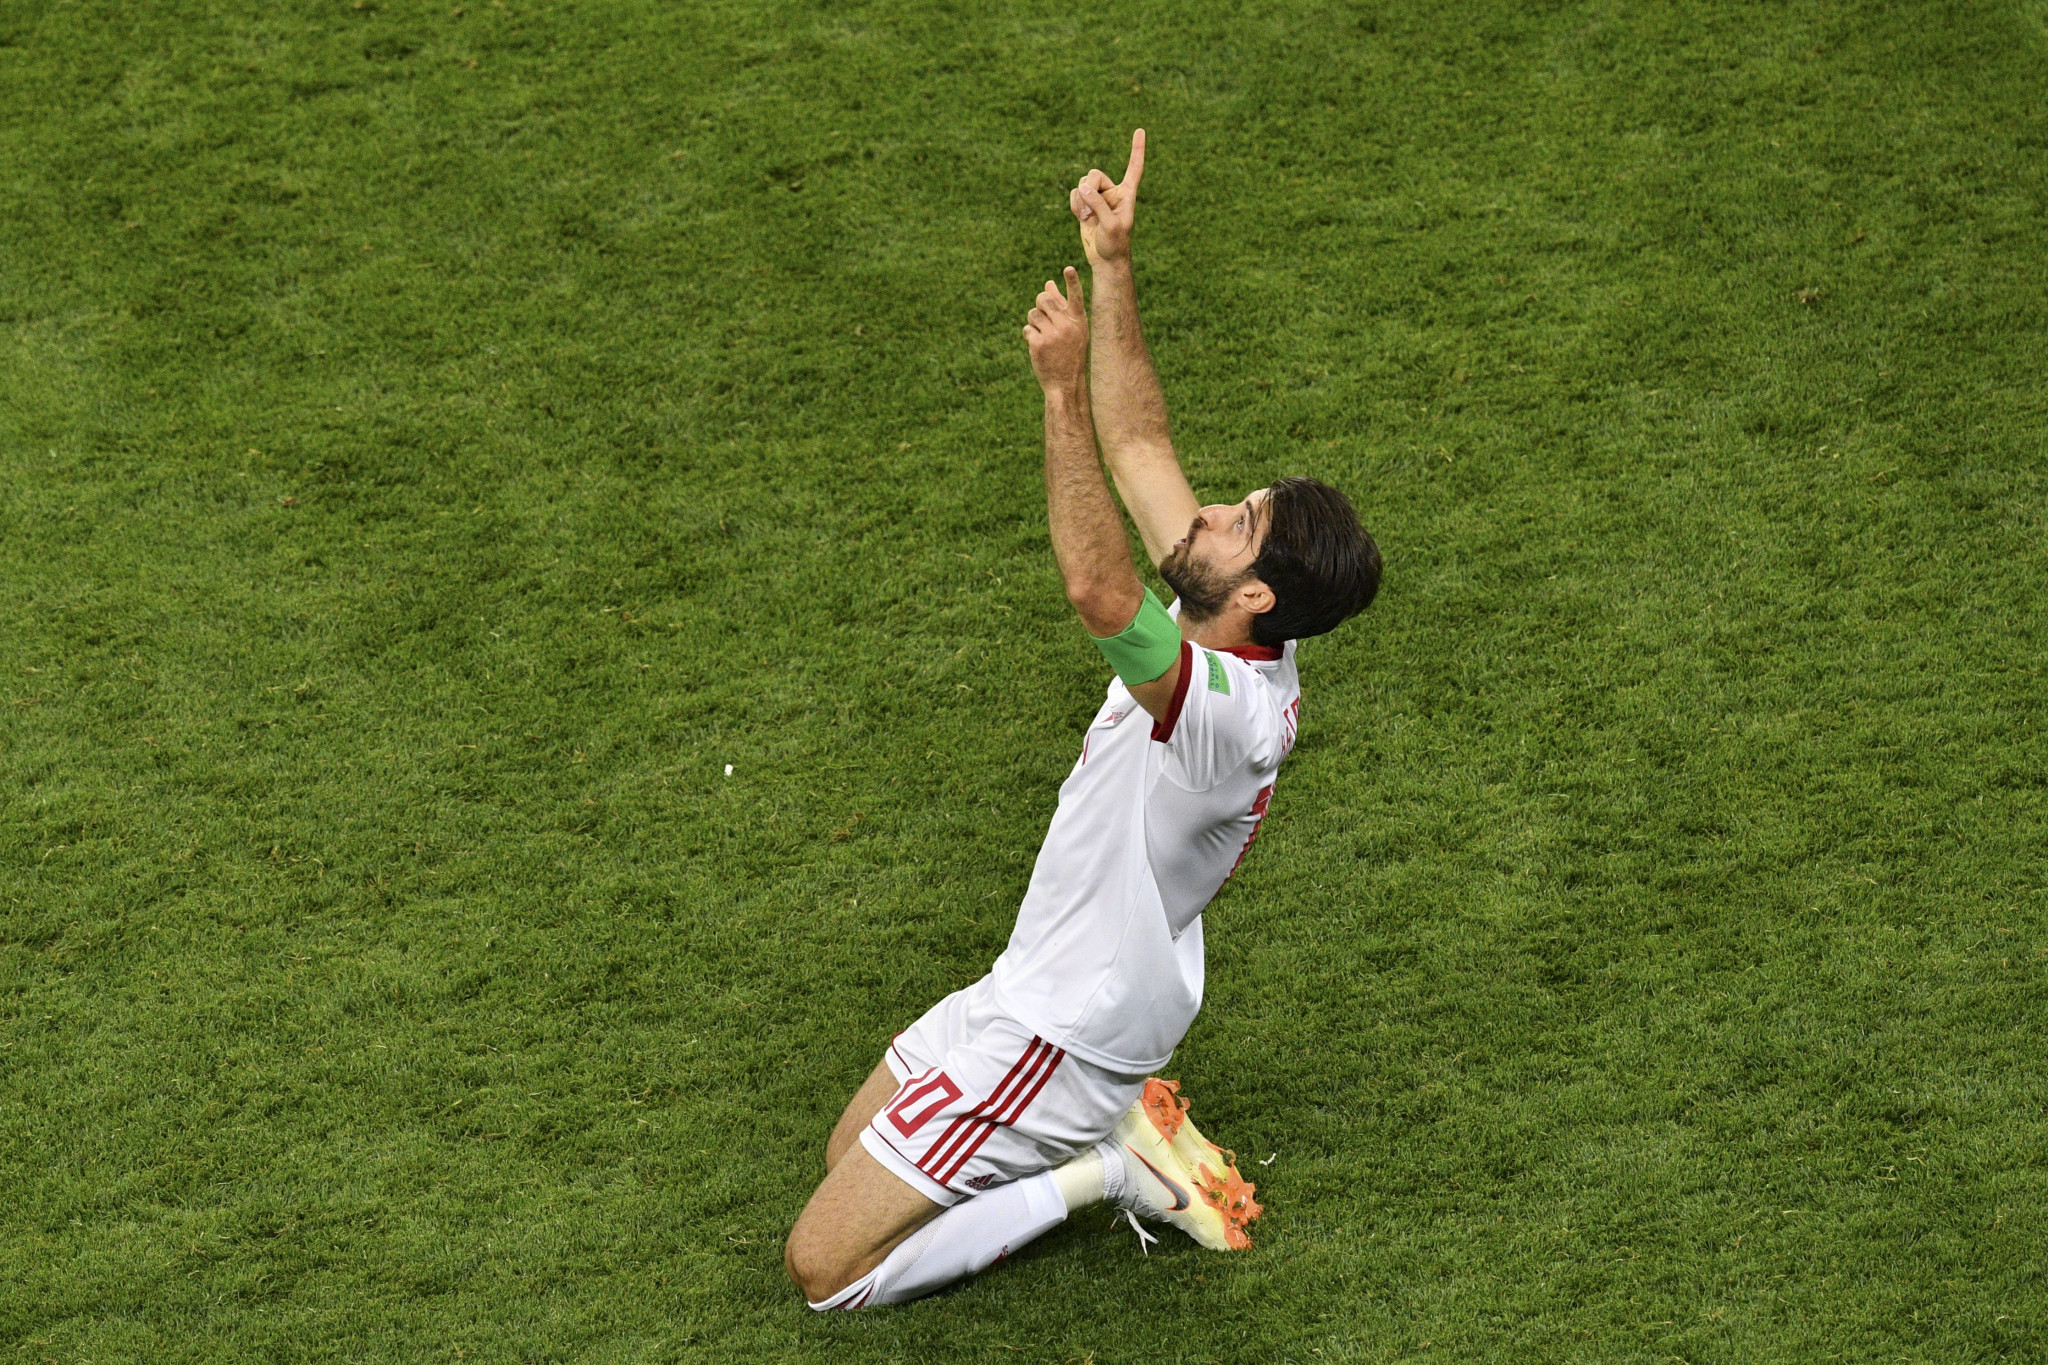 Karim Ansarifard's spot-kick was not enough as Iran were knocked out of the tournament ©Getty Images